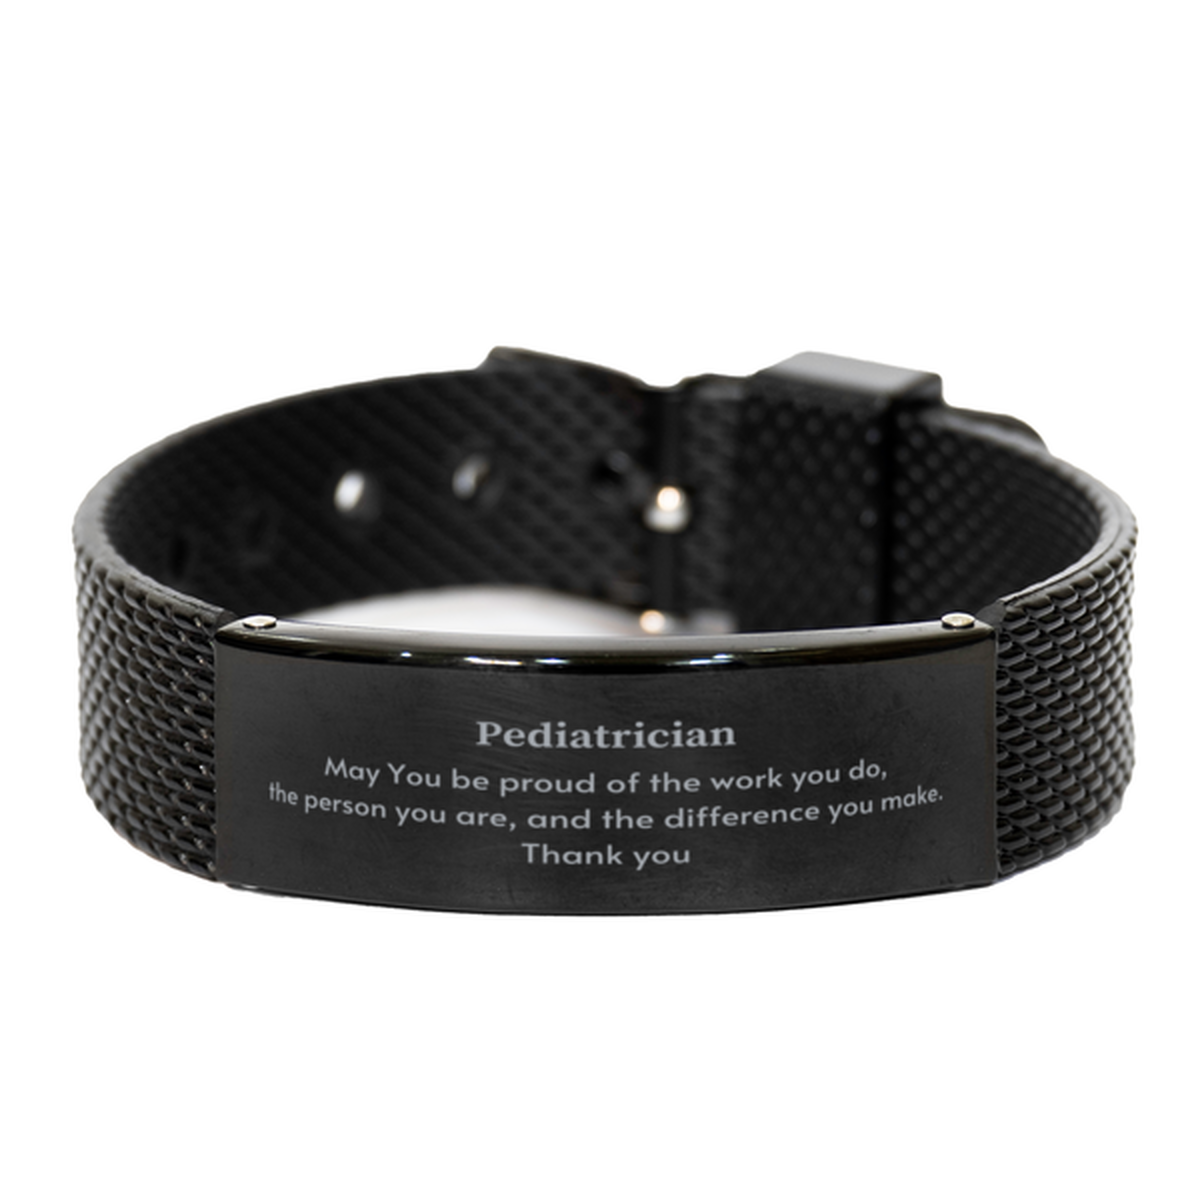 Heartwarming Black Shark Mesh Bracelet Retirement Coworkers Gifts for Pediatrician, Pediatrician May You be proud of the work you do, the person you are Gifts for Boss Men Women Friends